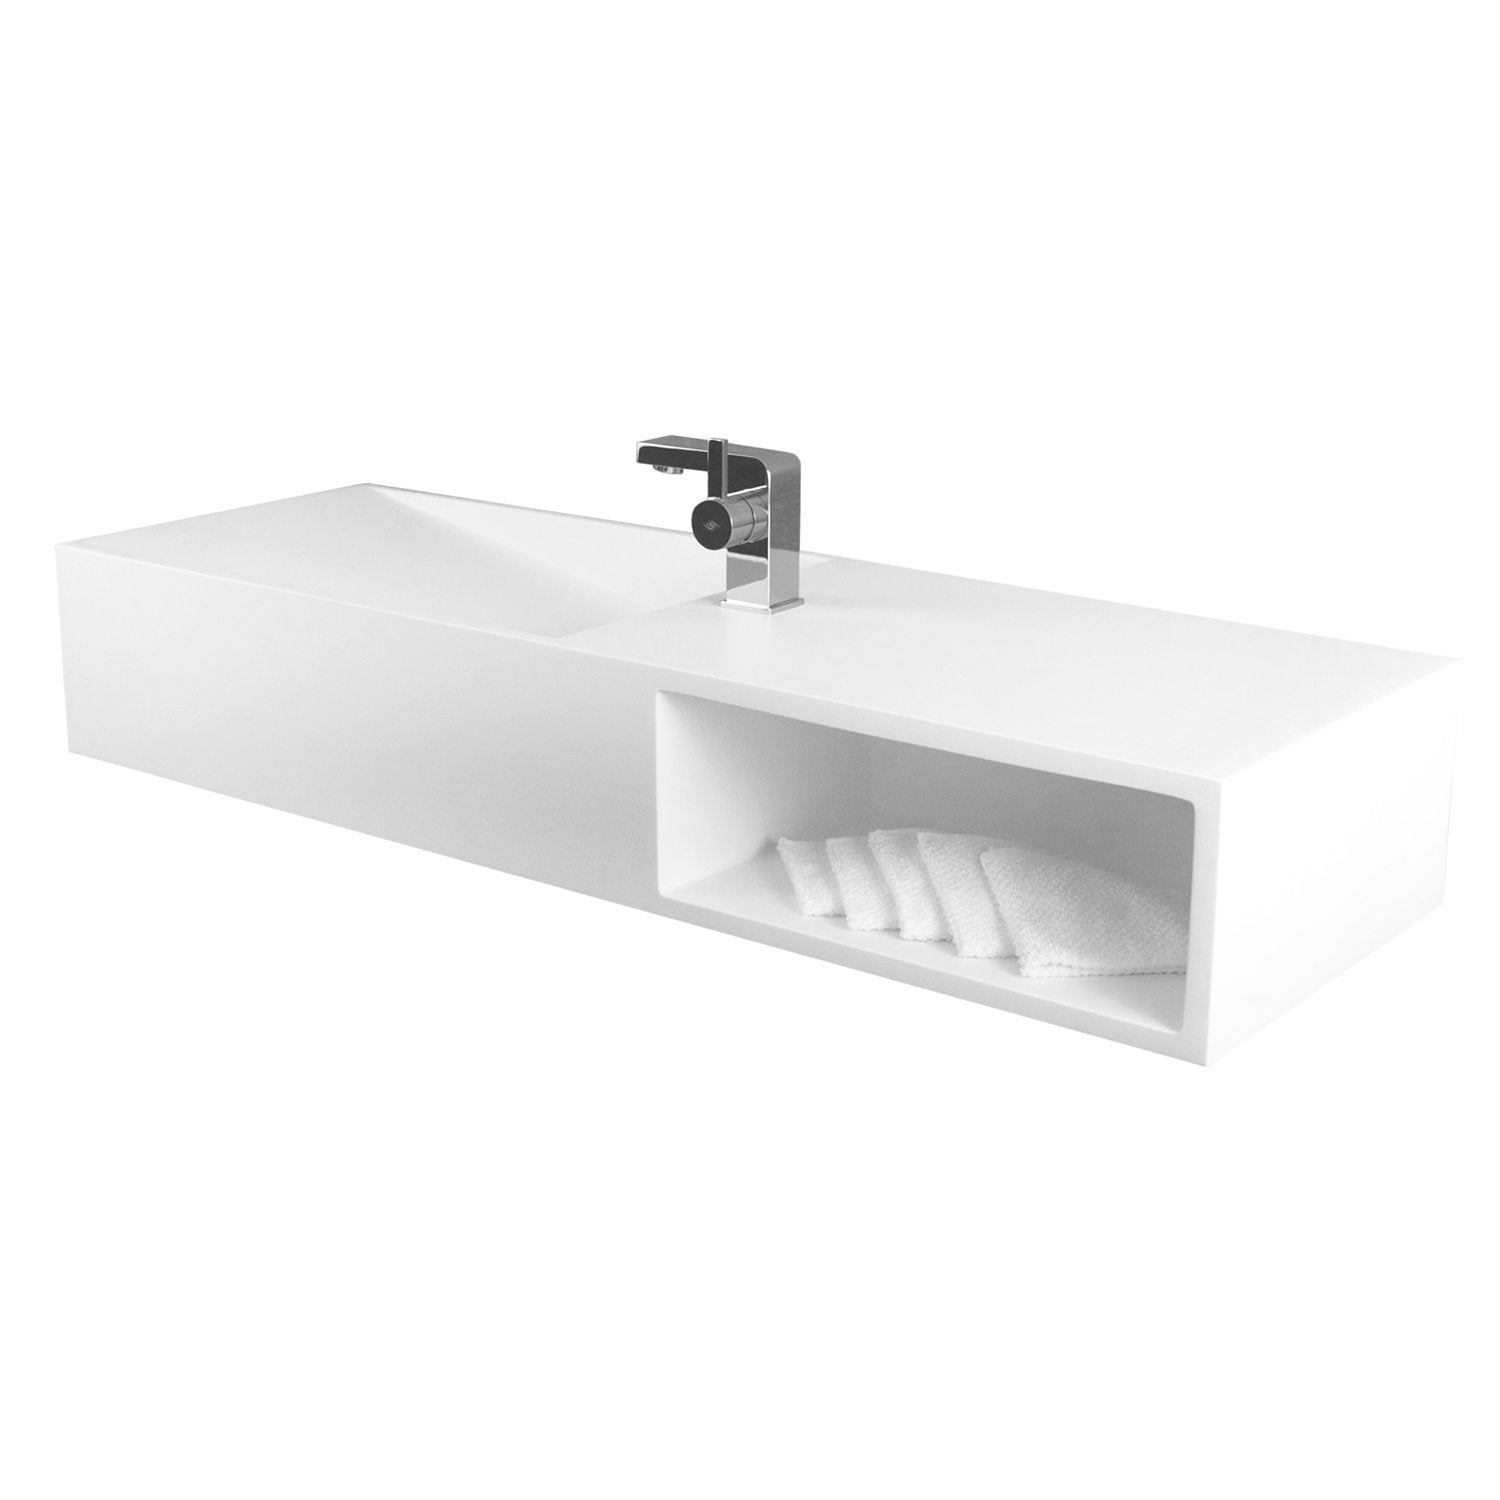 DAX Solid Surface Rectangle Single Bowl Bathroom Sink Cabinet, White Matte Finish,  47-1/4 x 16-1/2 x 7-7/8 Inches (DAX-AB-1365)